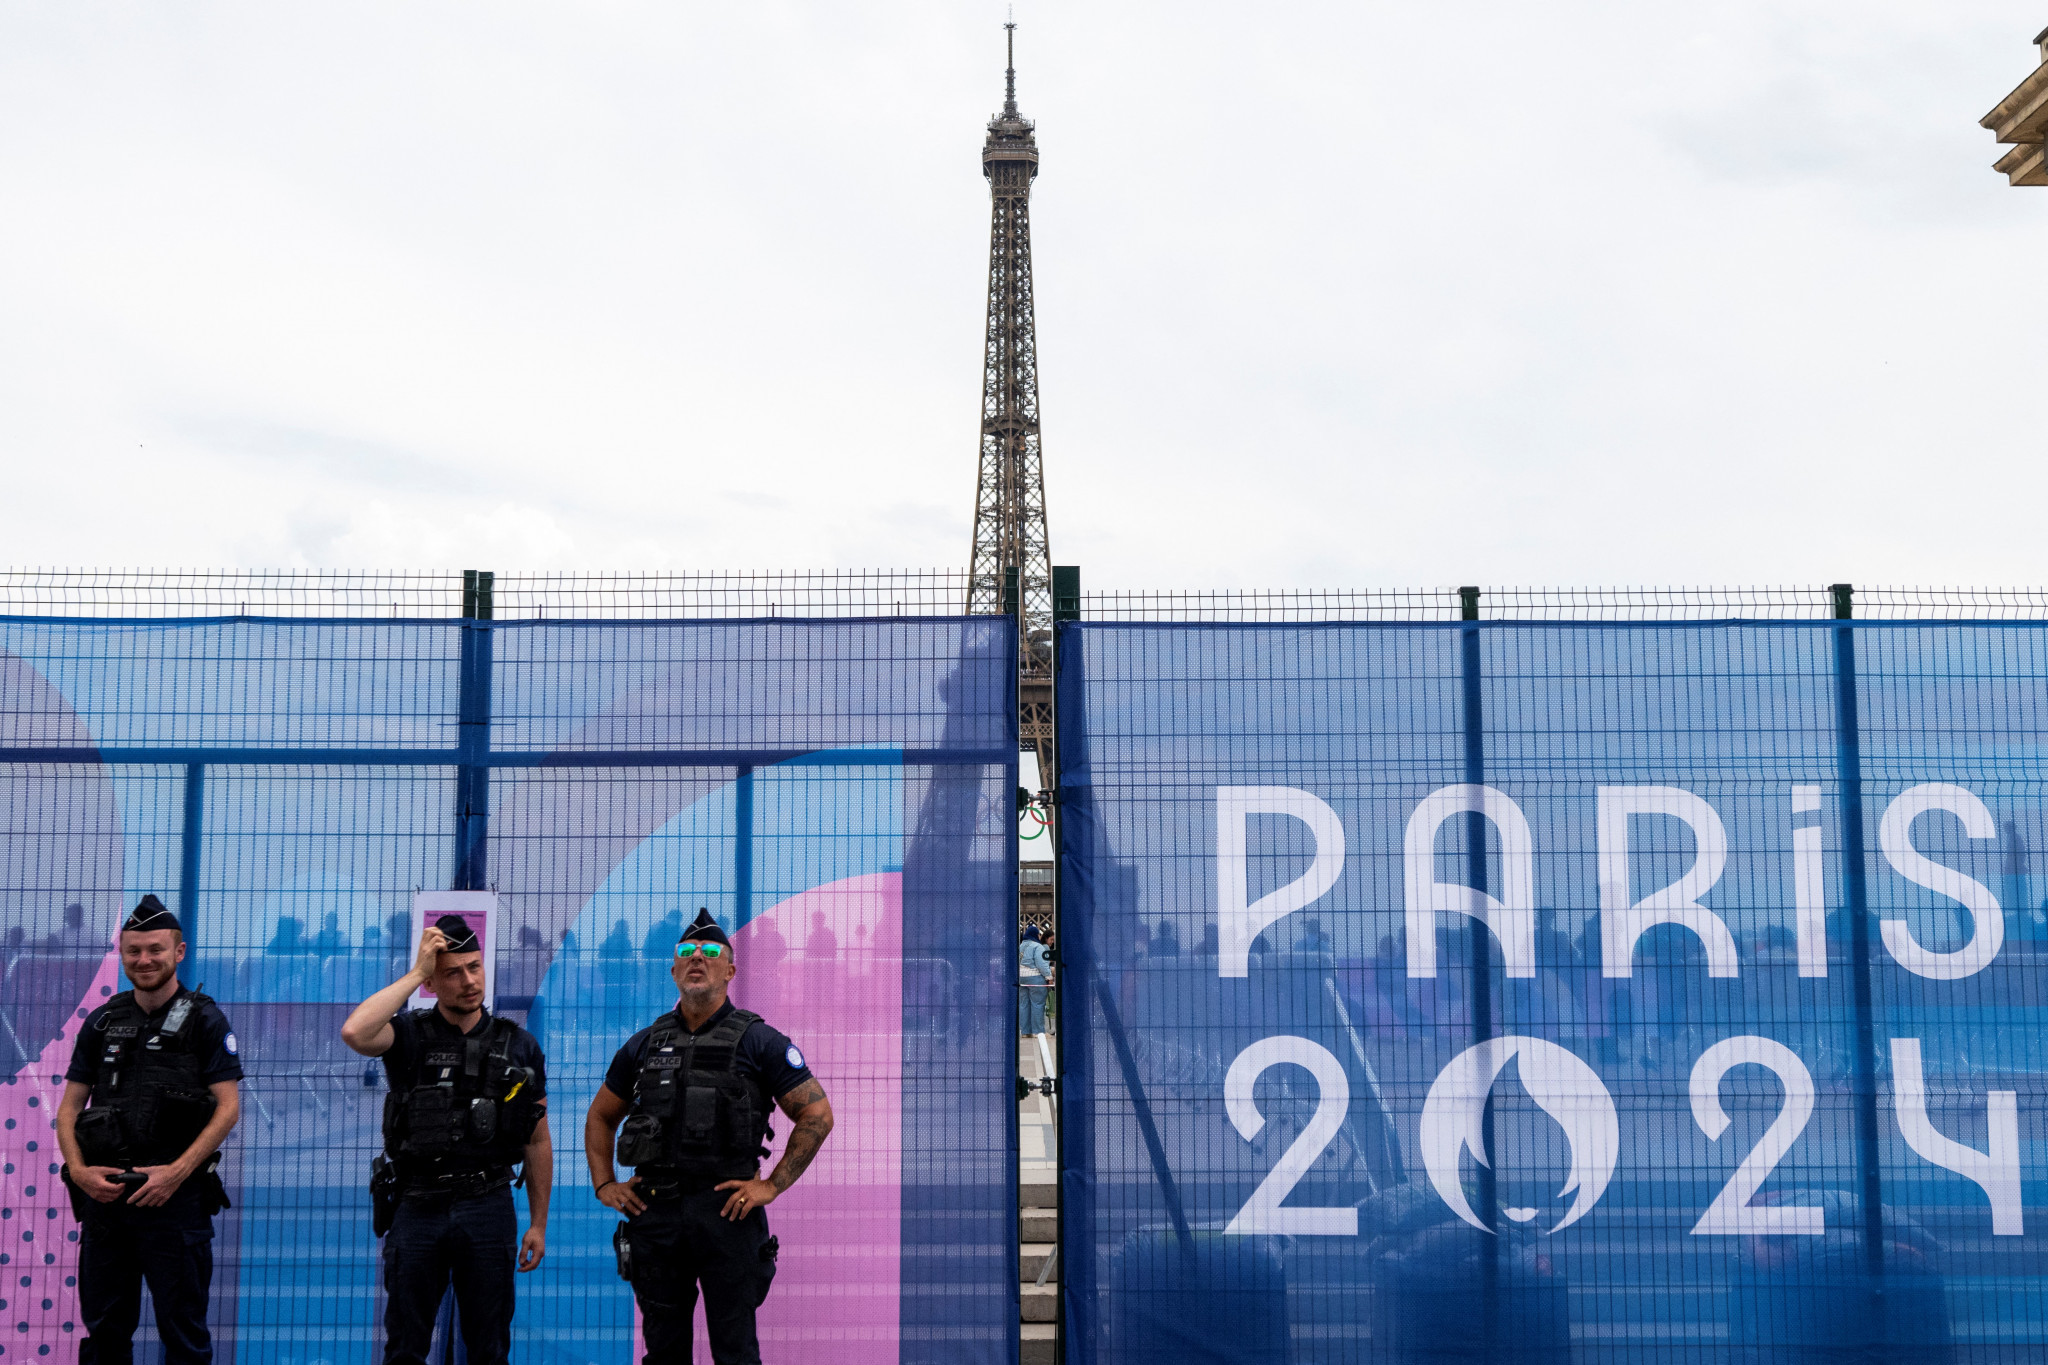 Central Paris has locked down various streets and tightened up its security ahead of Paris 2024. GETTY IMAGES